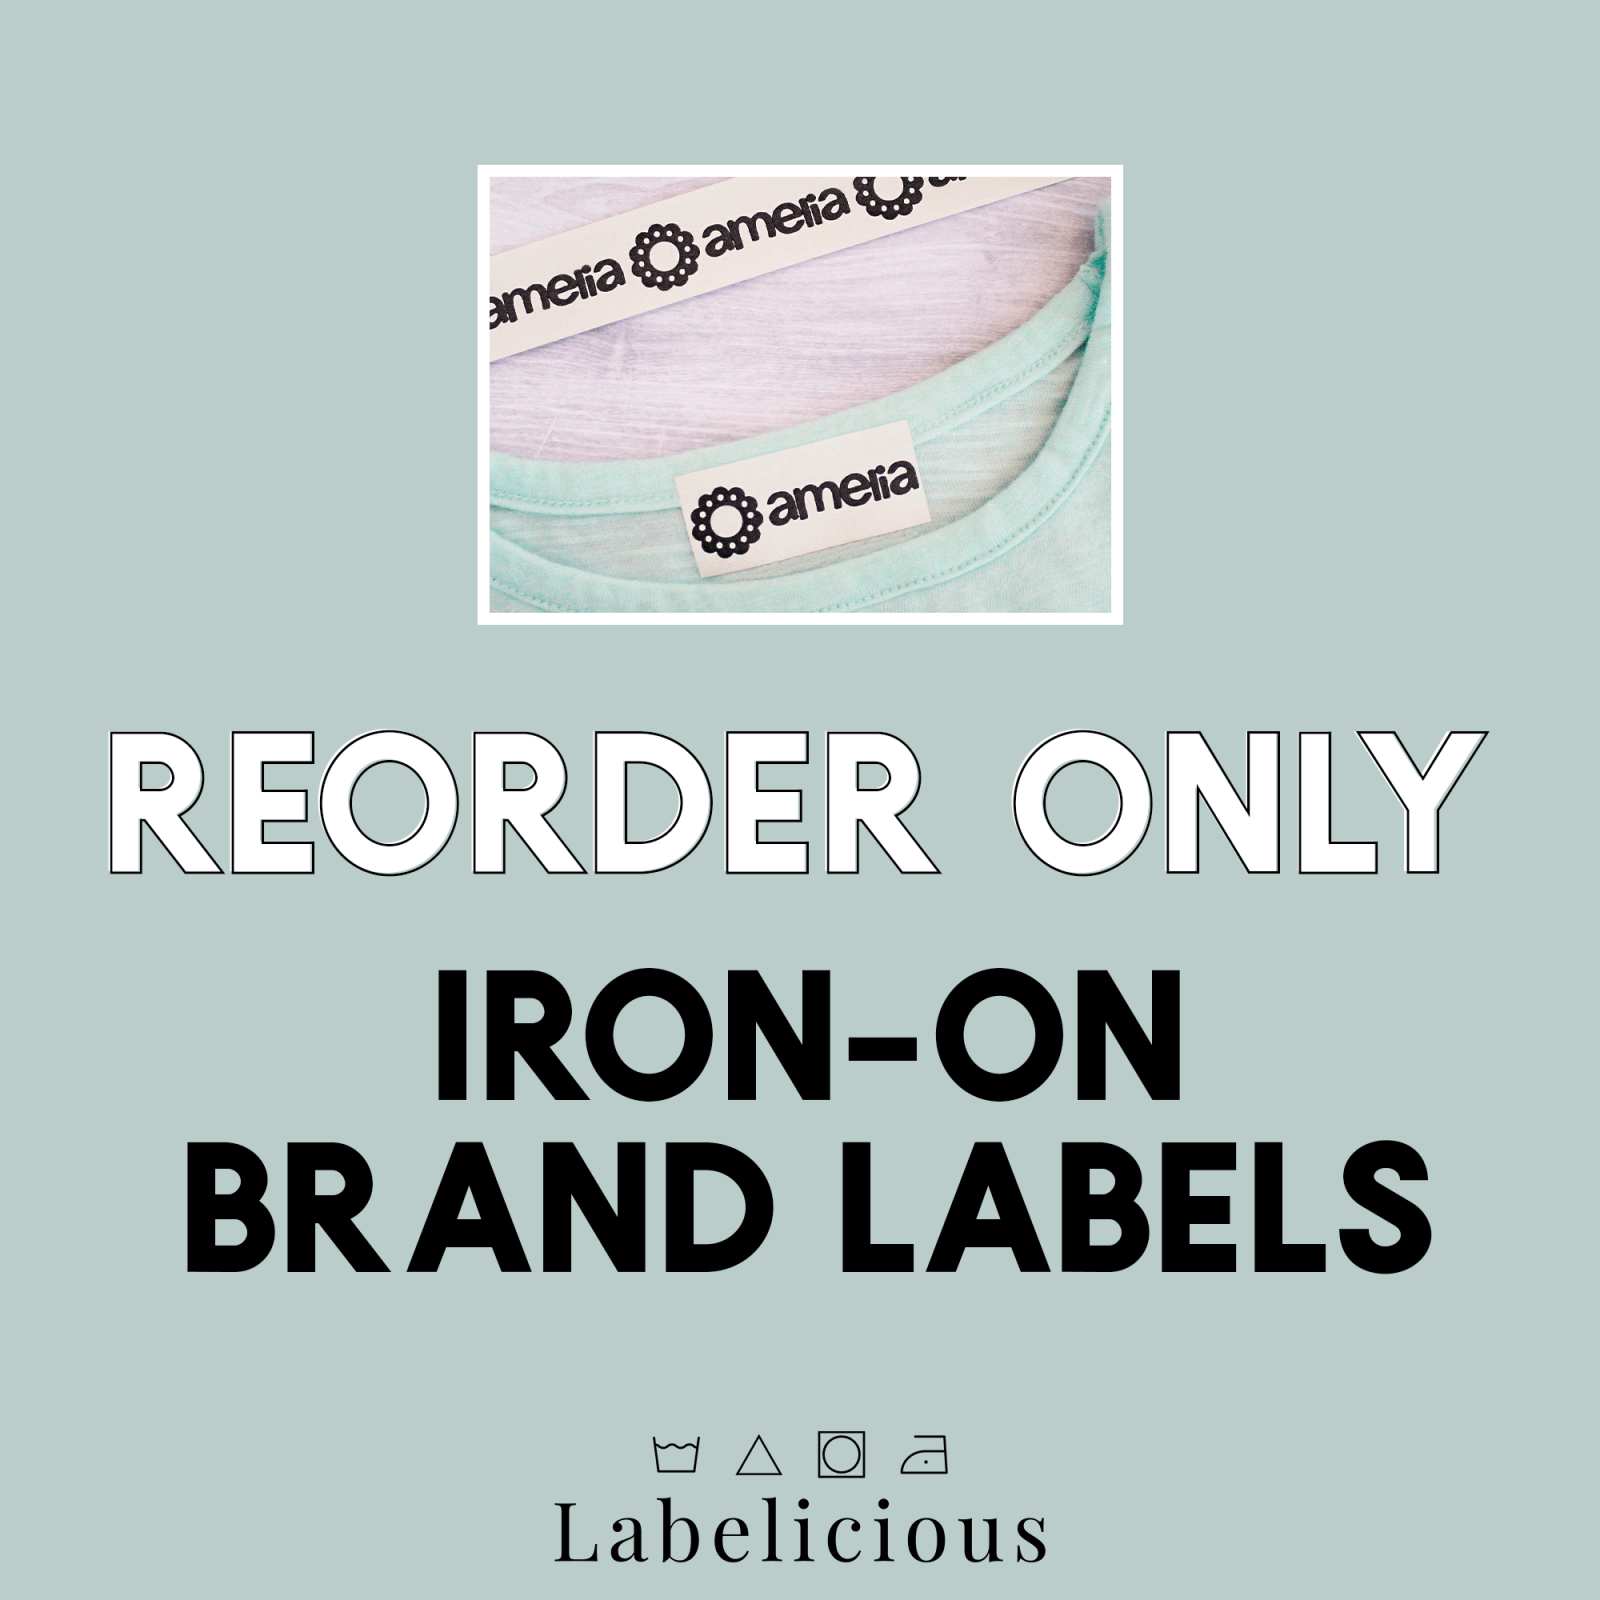 re-order-only-iron-on-brand-labels-538923.png